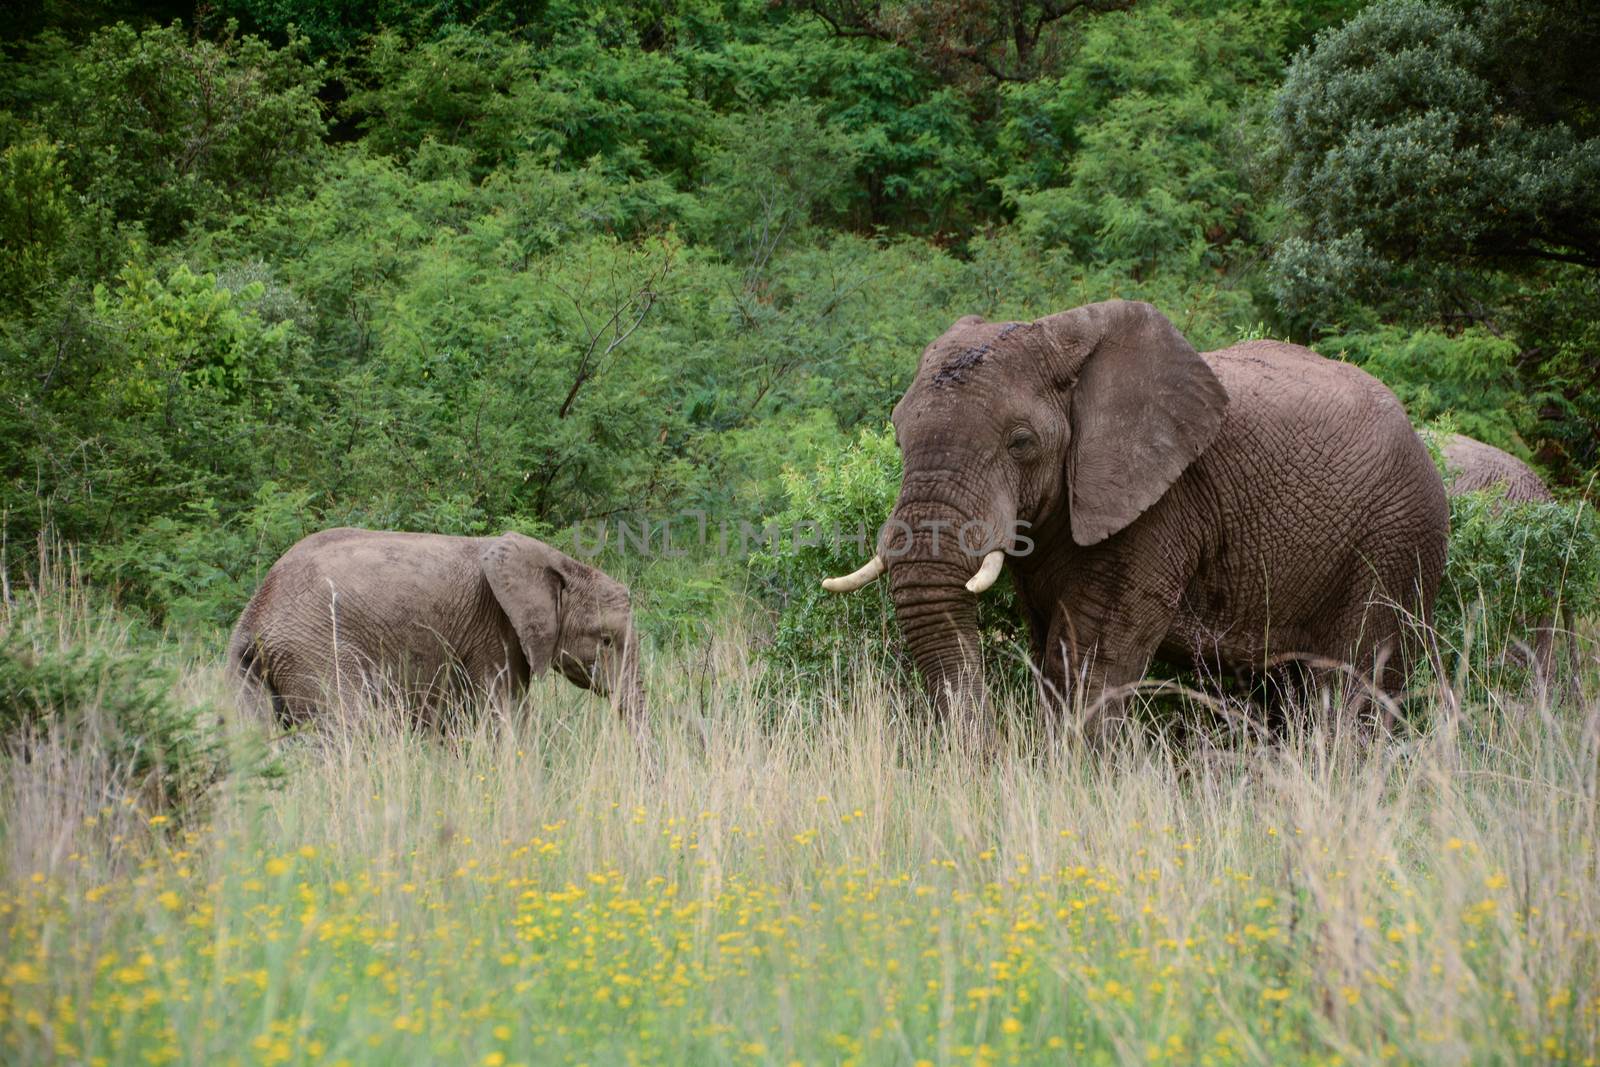 Elephant Mother and Child by marcrossmann